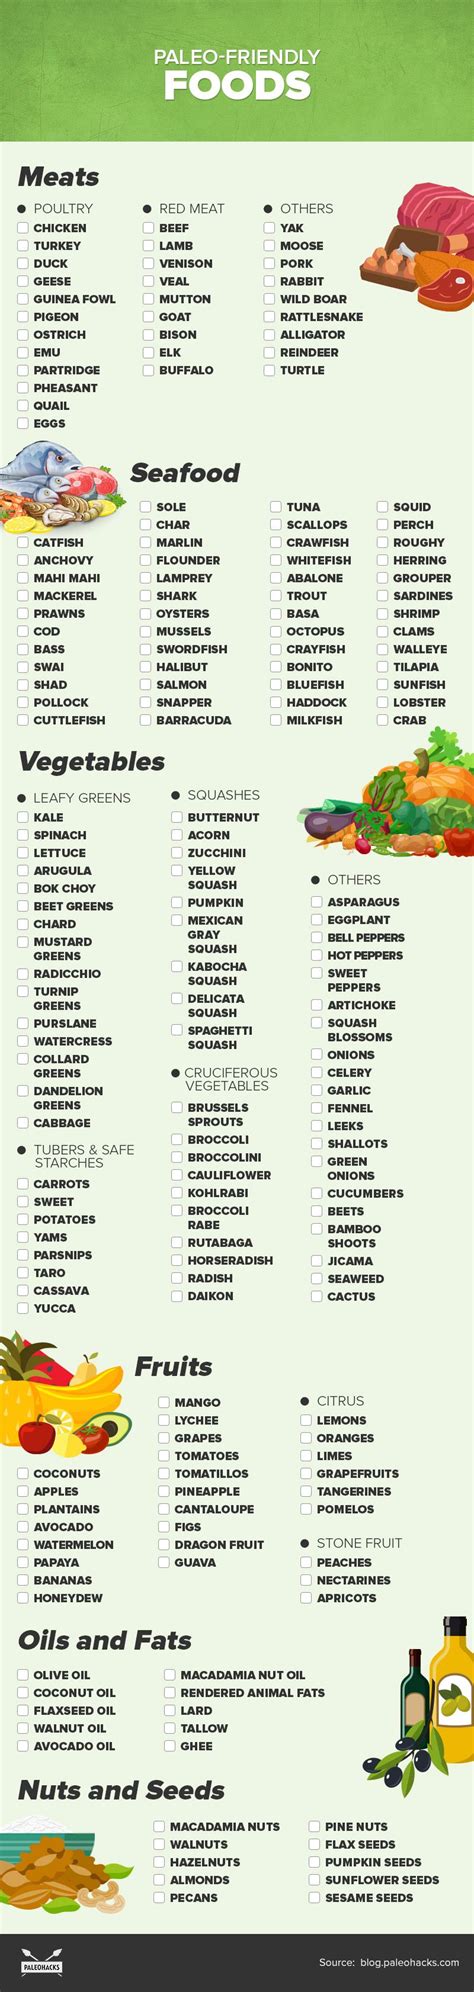 Let's look at the wide variety of flavorful (and healthy) choices. The Complete Paleo Diet Food List